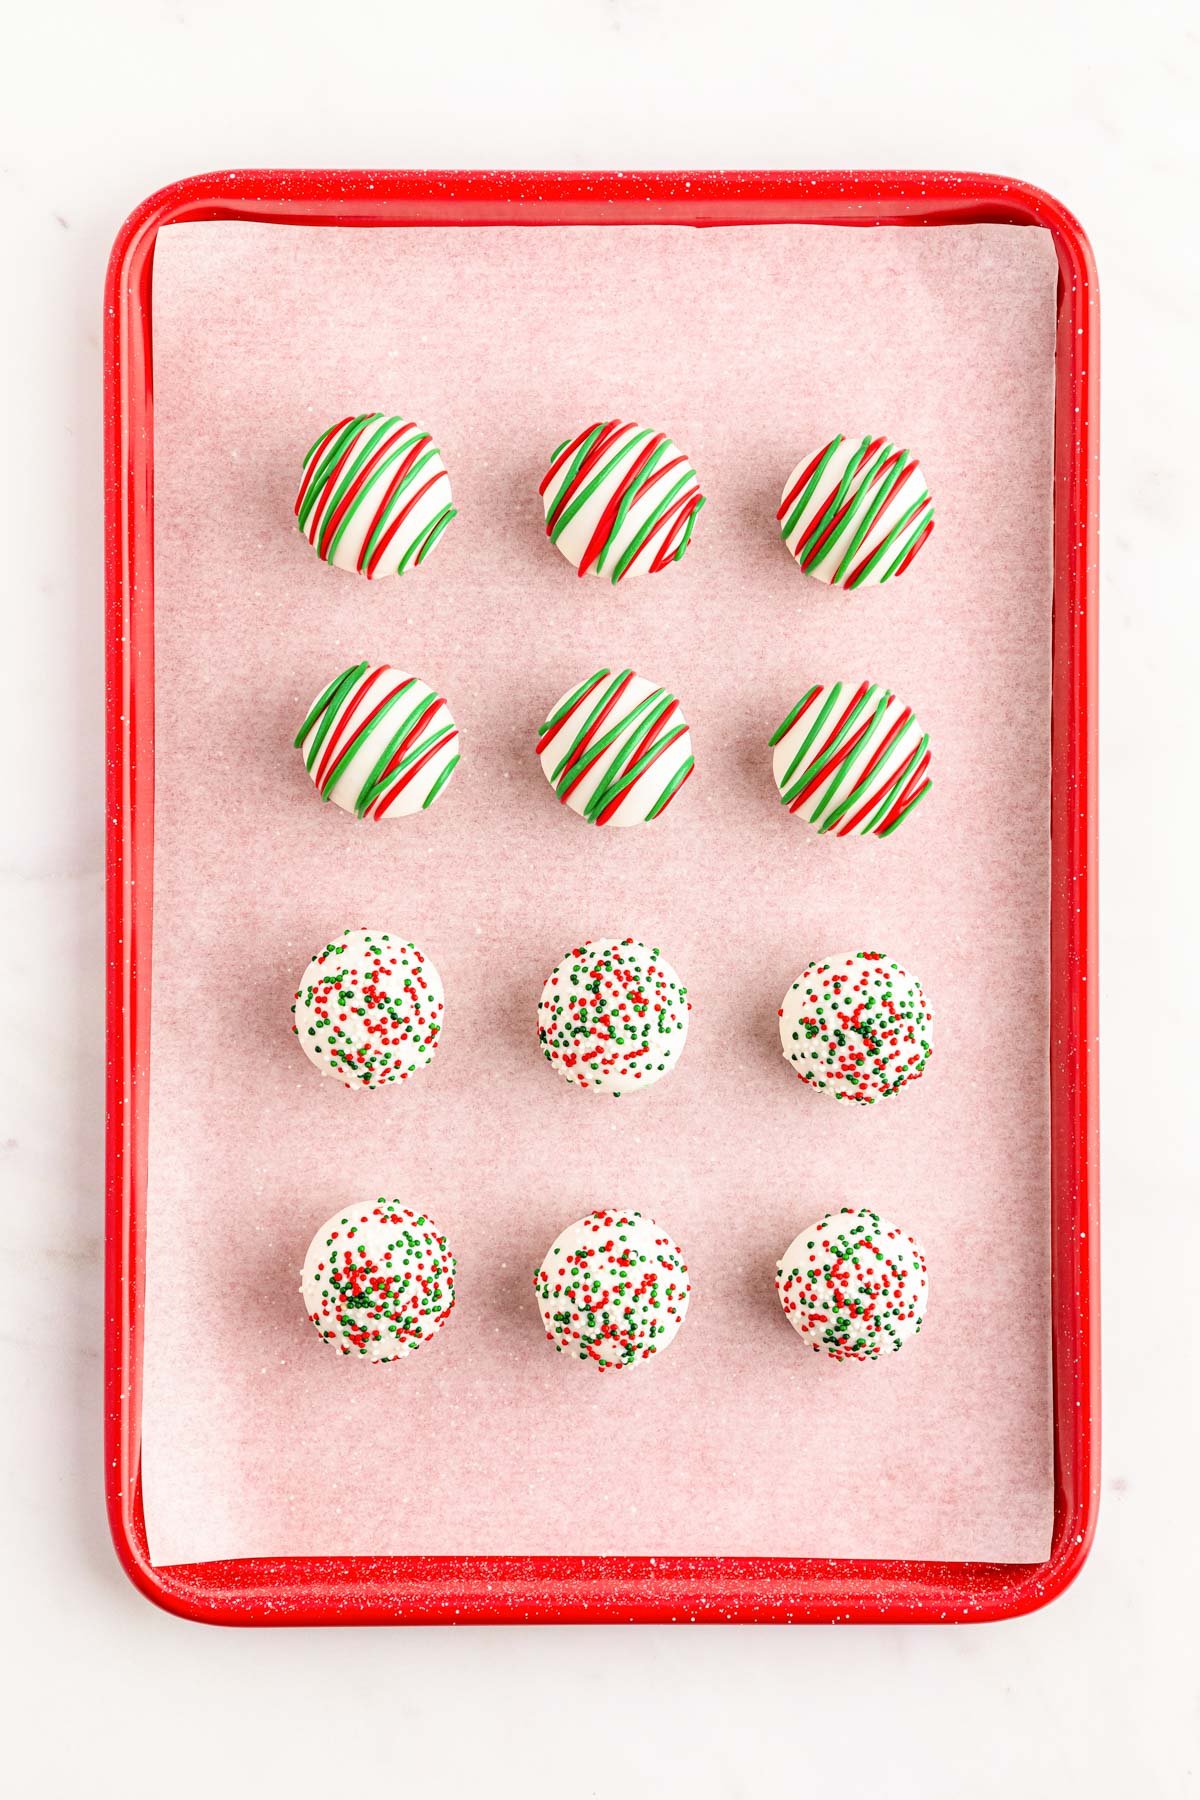 Cookie truffles decorated for Christmas on a baking sheet.